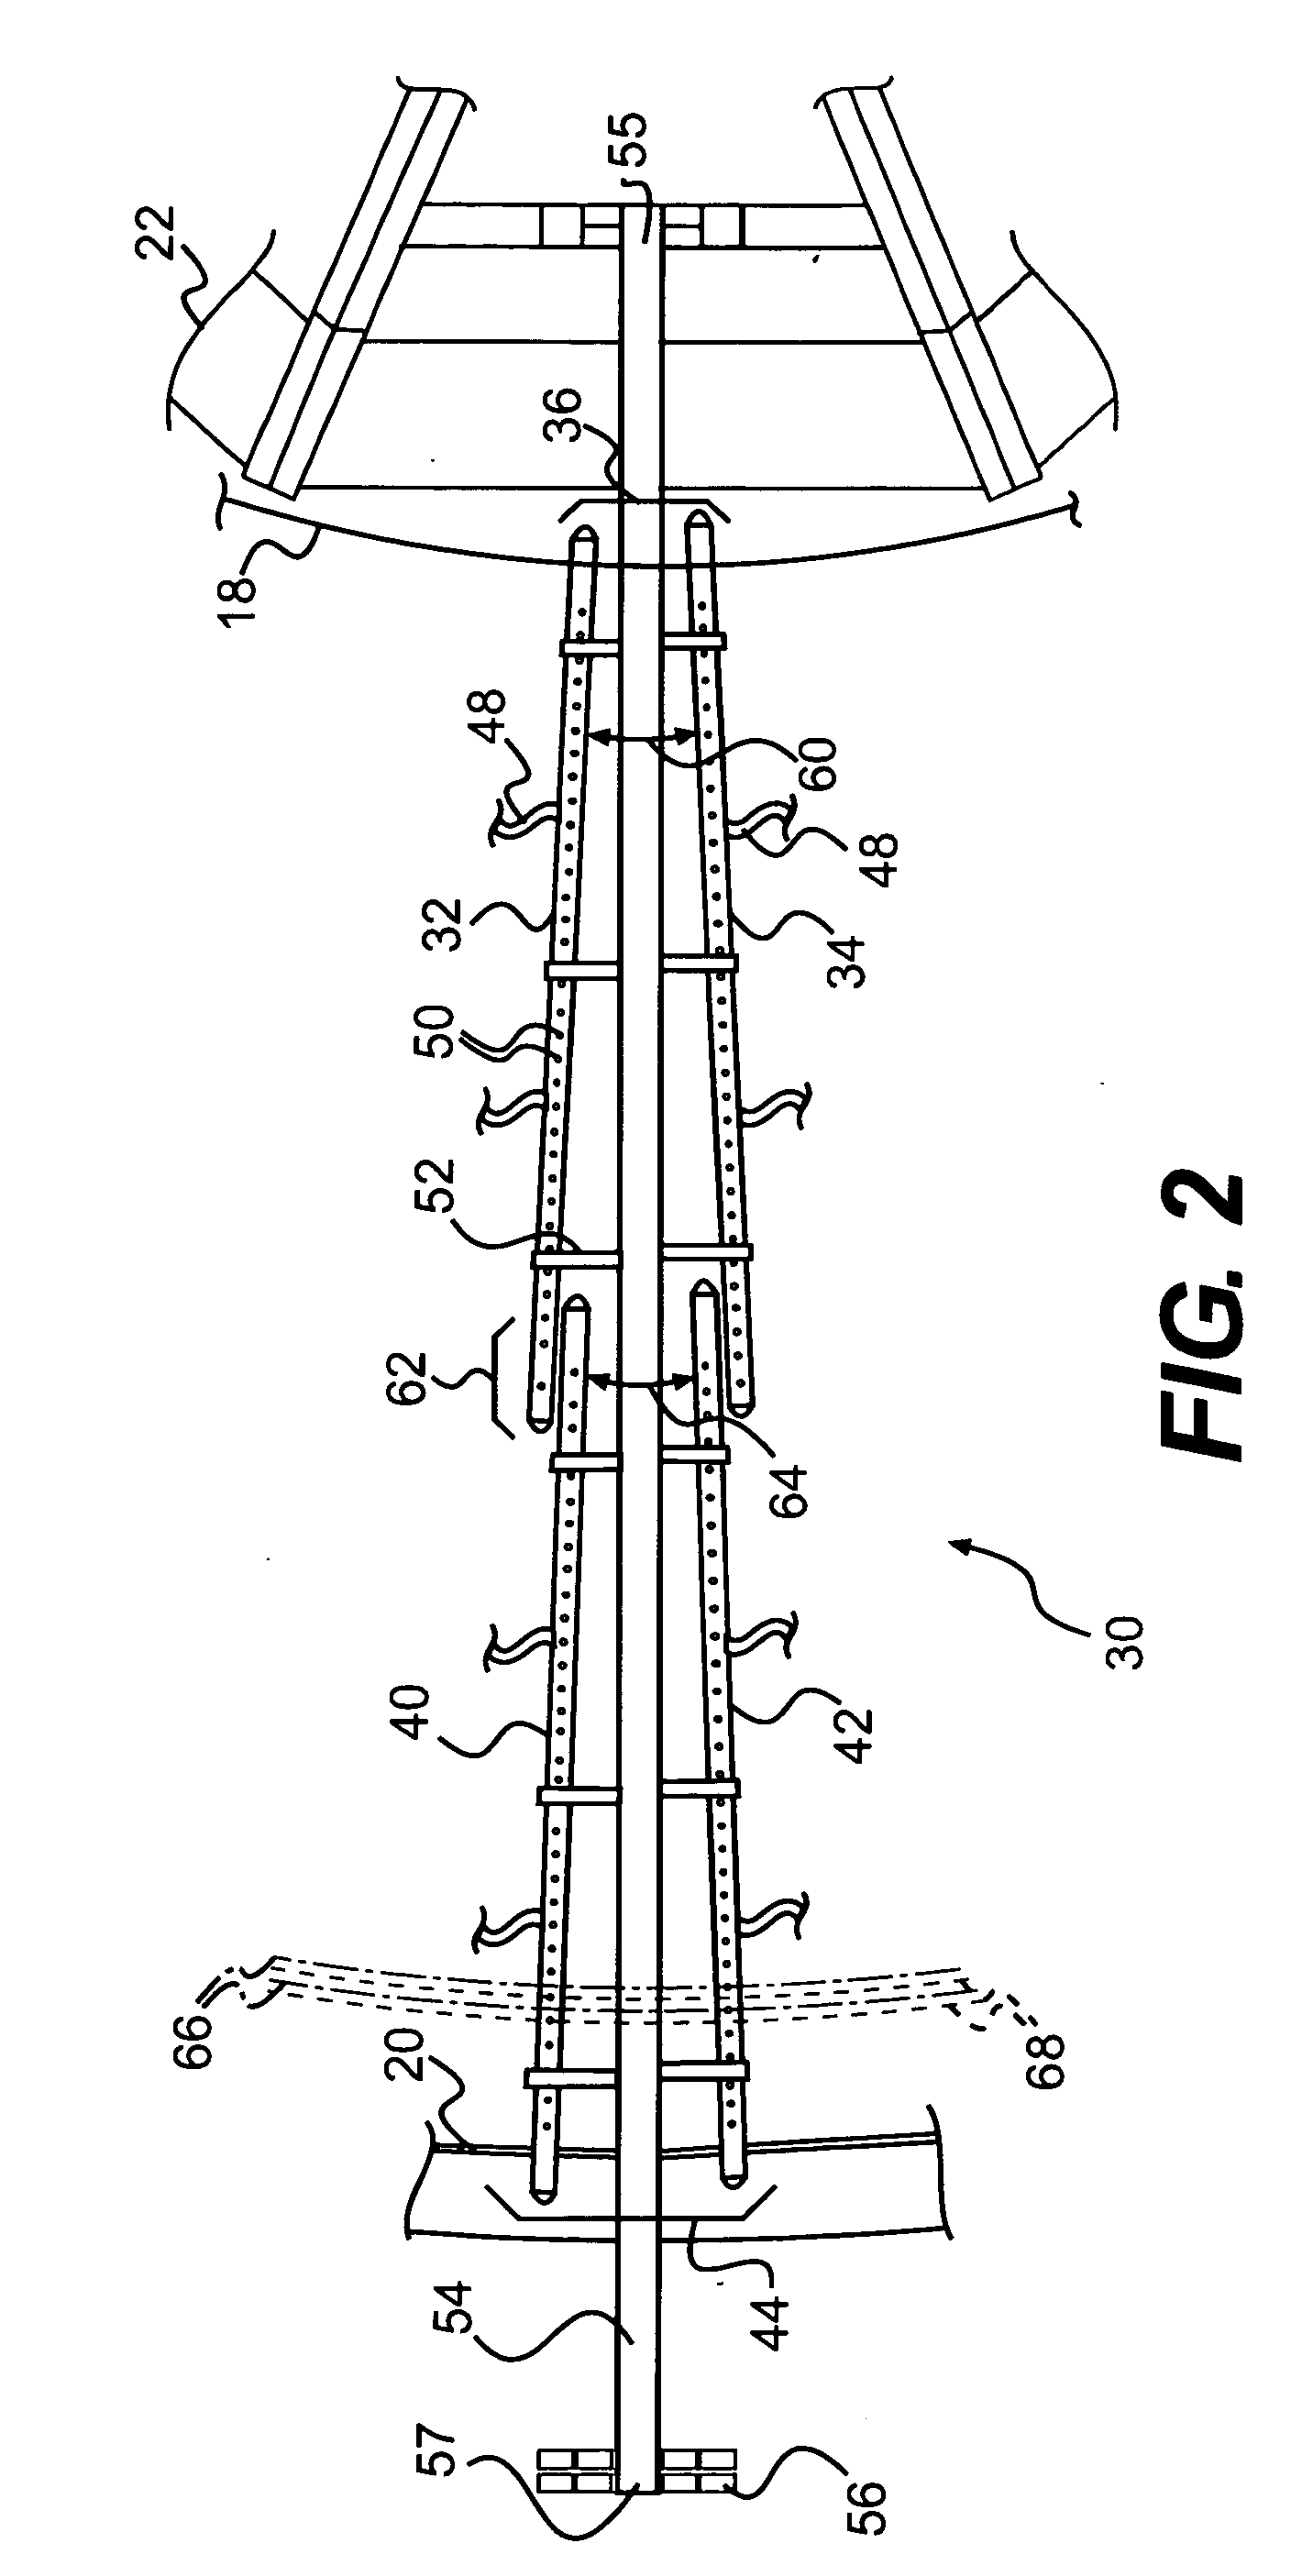 Method of filtering phosphate utilizing a rotary table filter or horizontal table filter